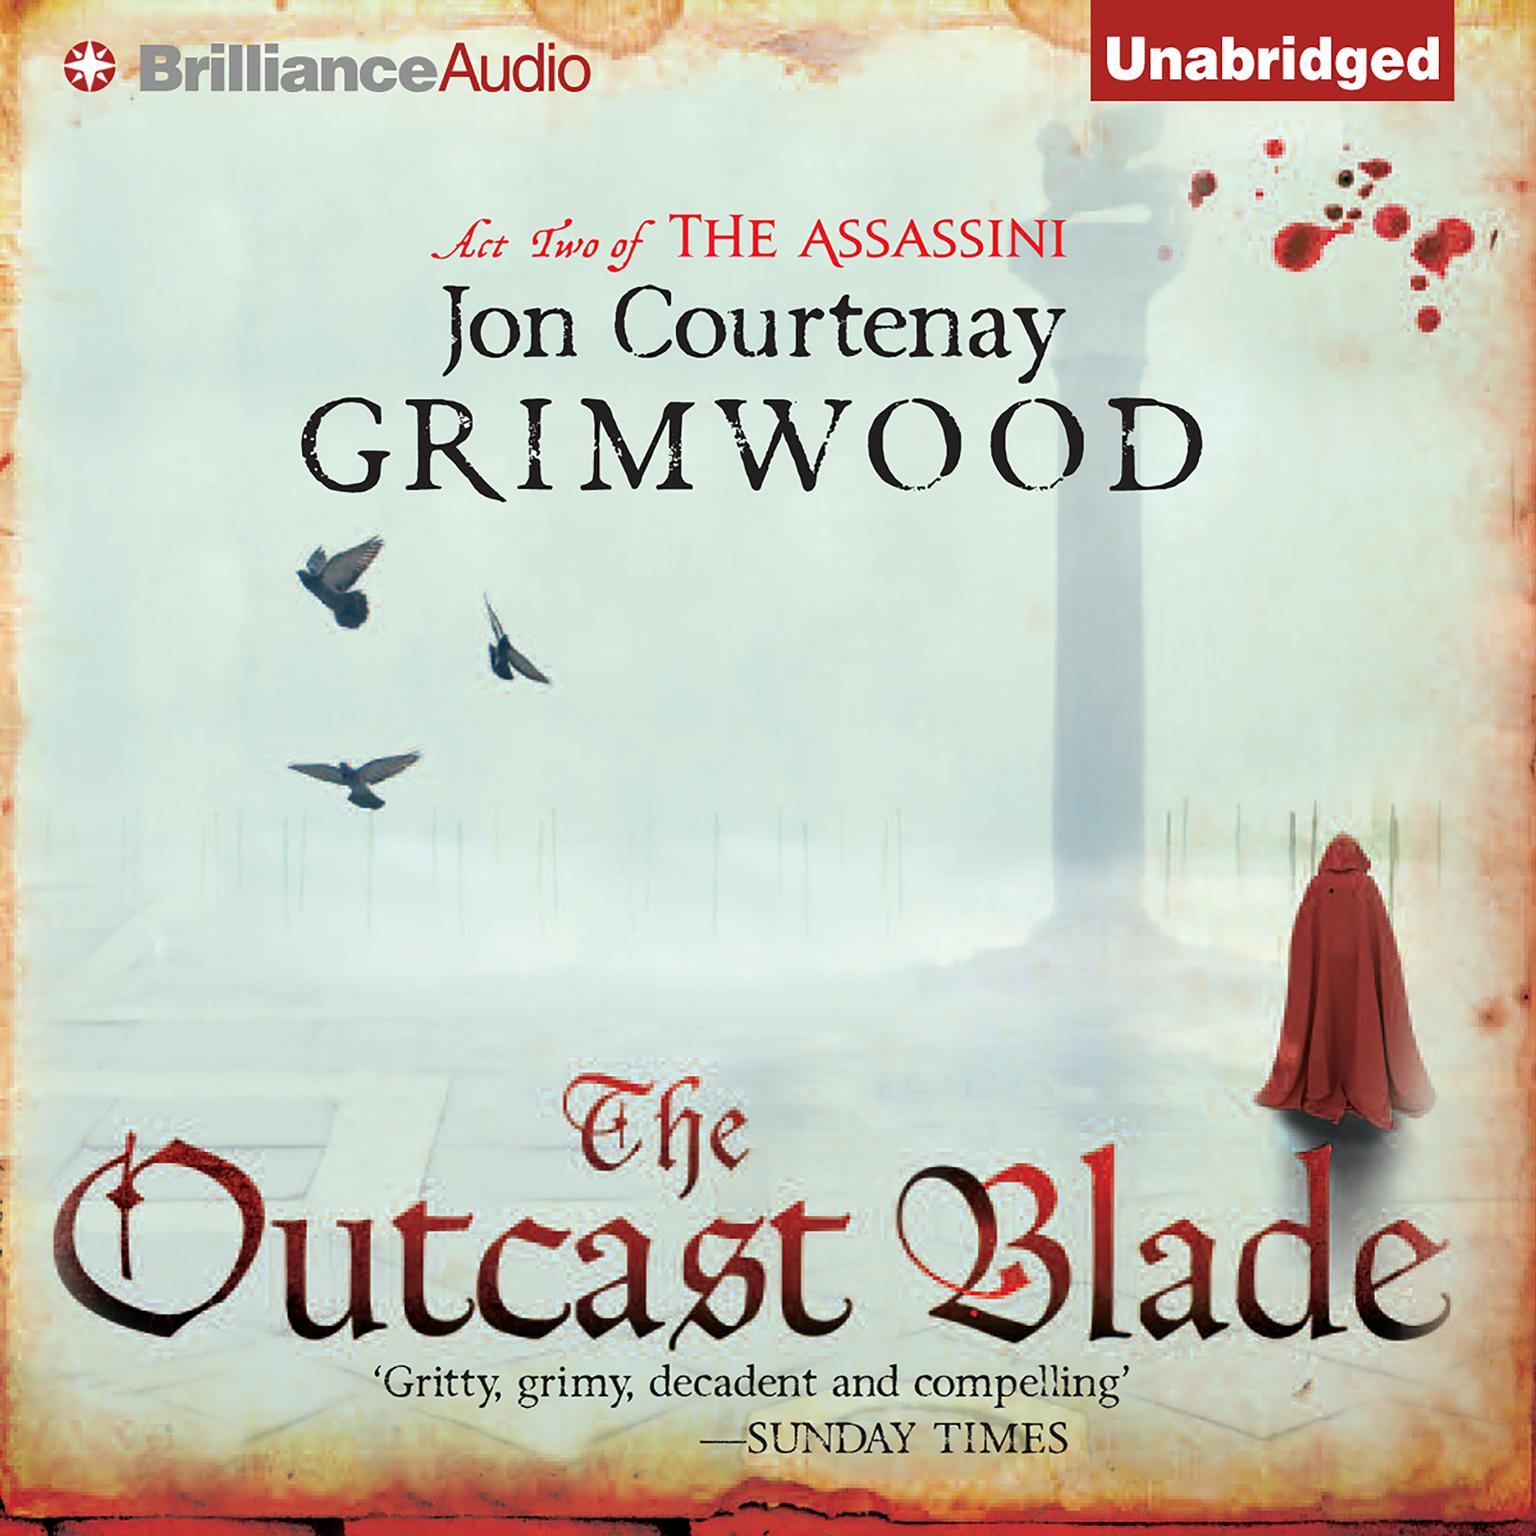 The Outcast Blade: Act Two of the Assassini Audiobook, by Jon Courtenay Grimwood